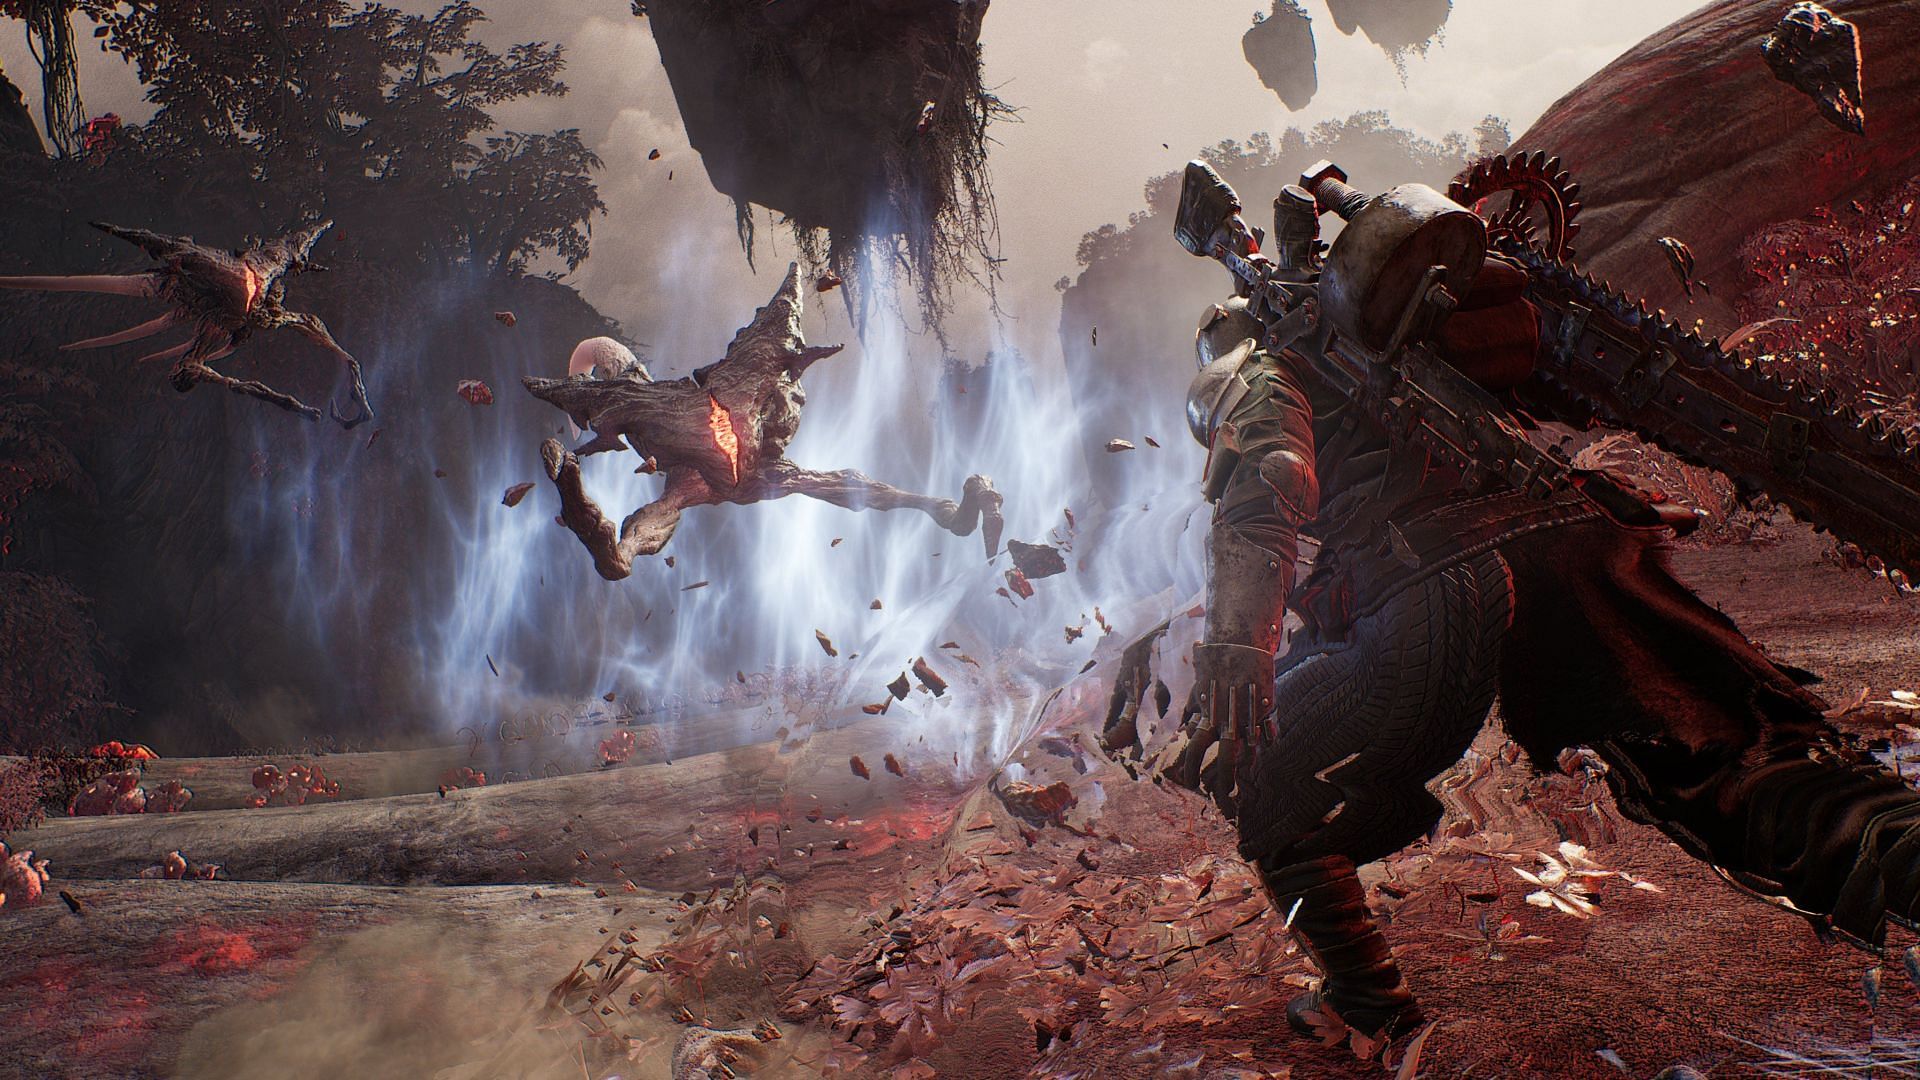 Danger lurks around every corner in Remnant 2 (Image via Gearbox Publishing)